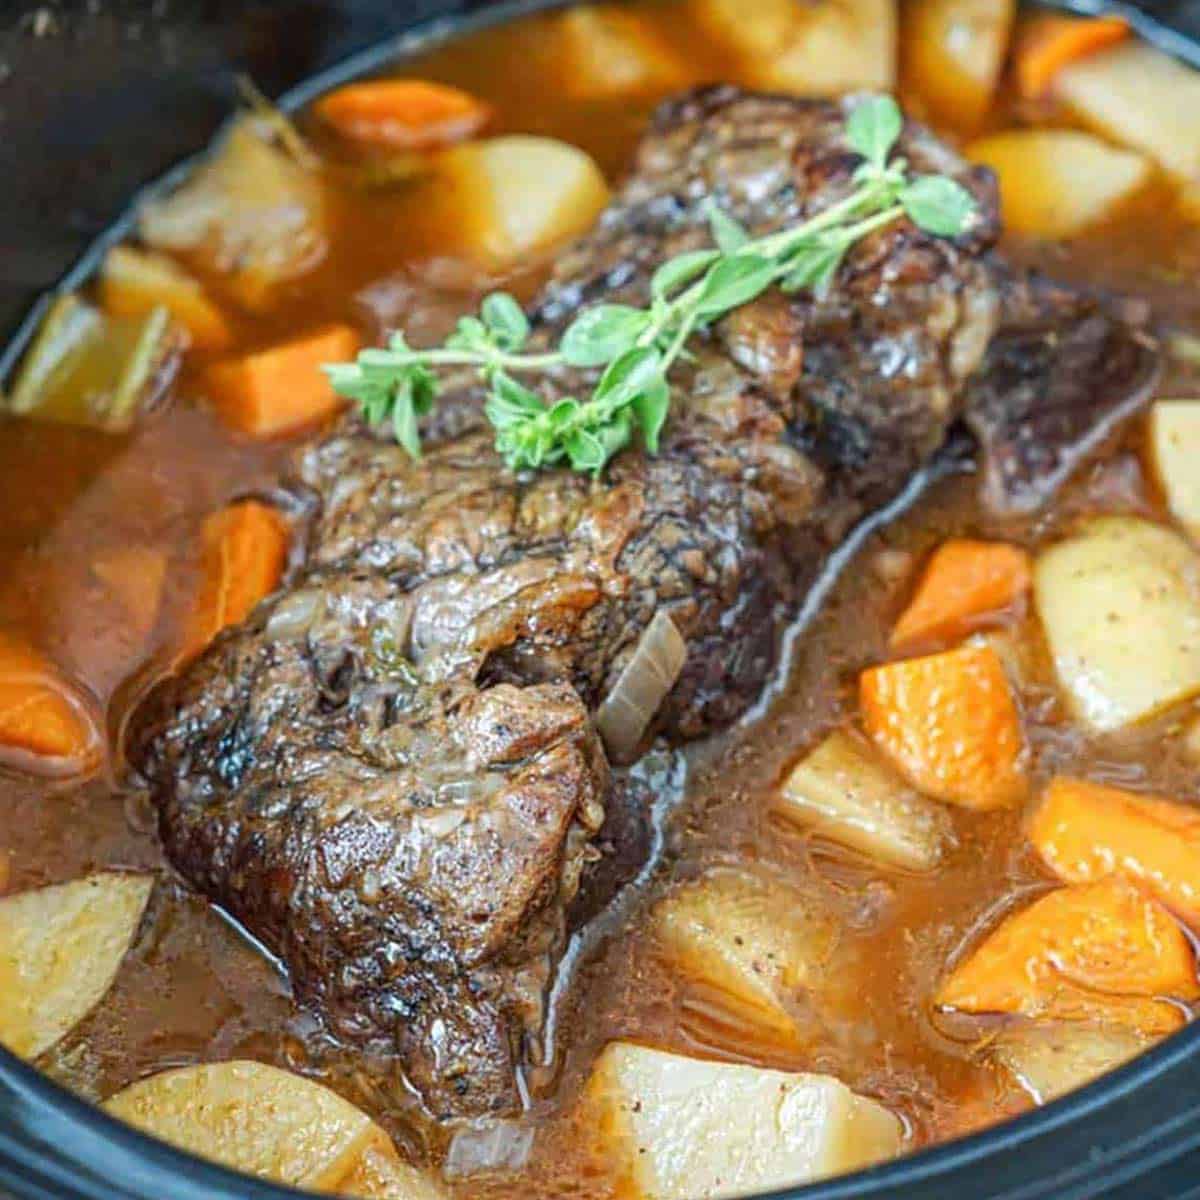 Slow cooker chuck roast in the crockpot with potatoes and carrots